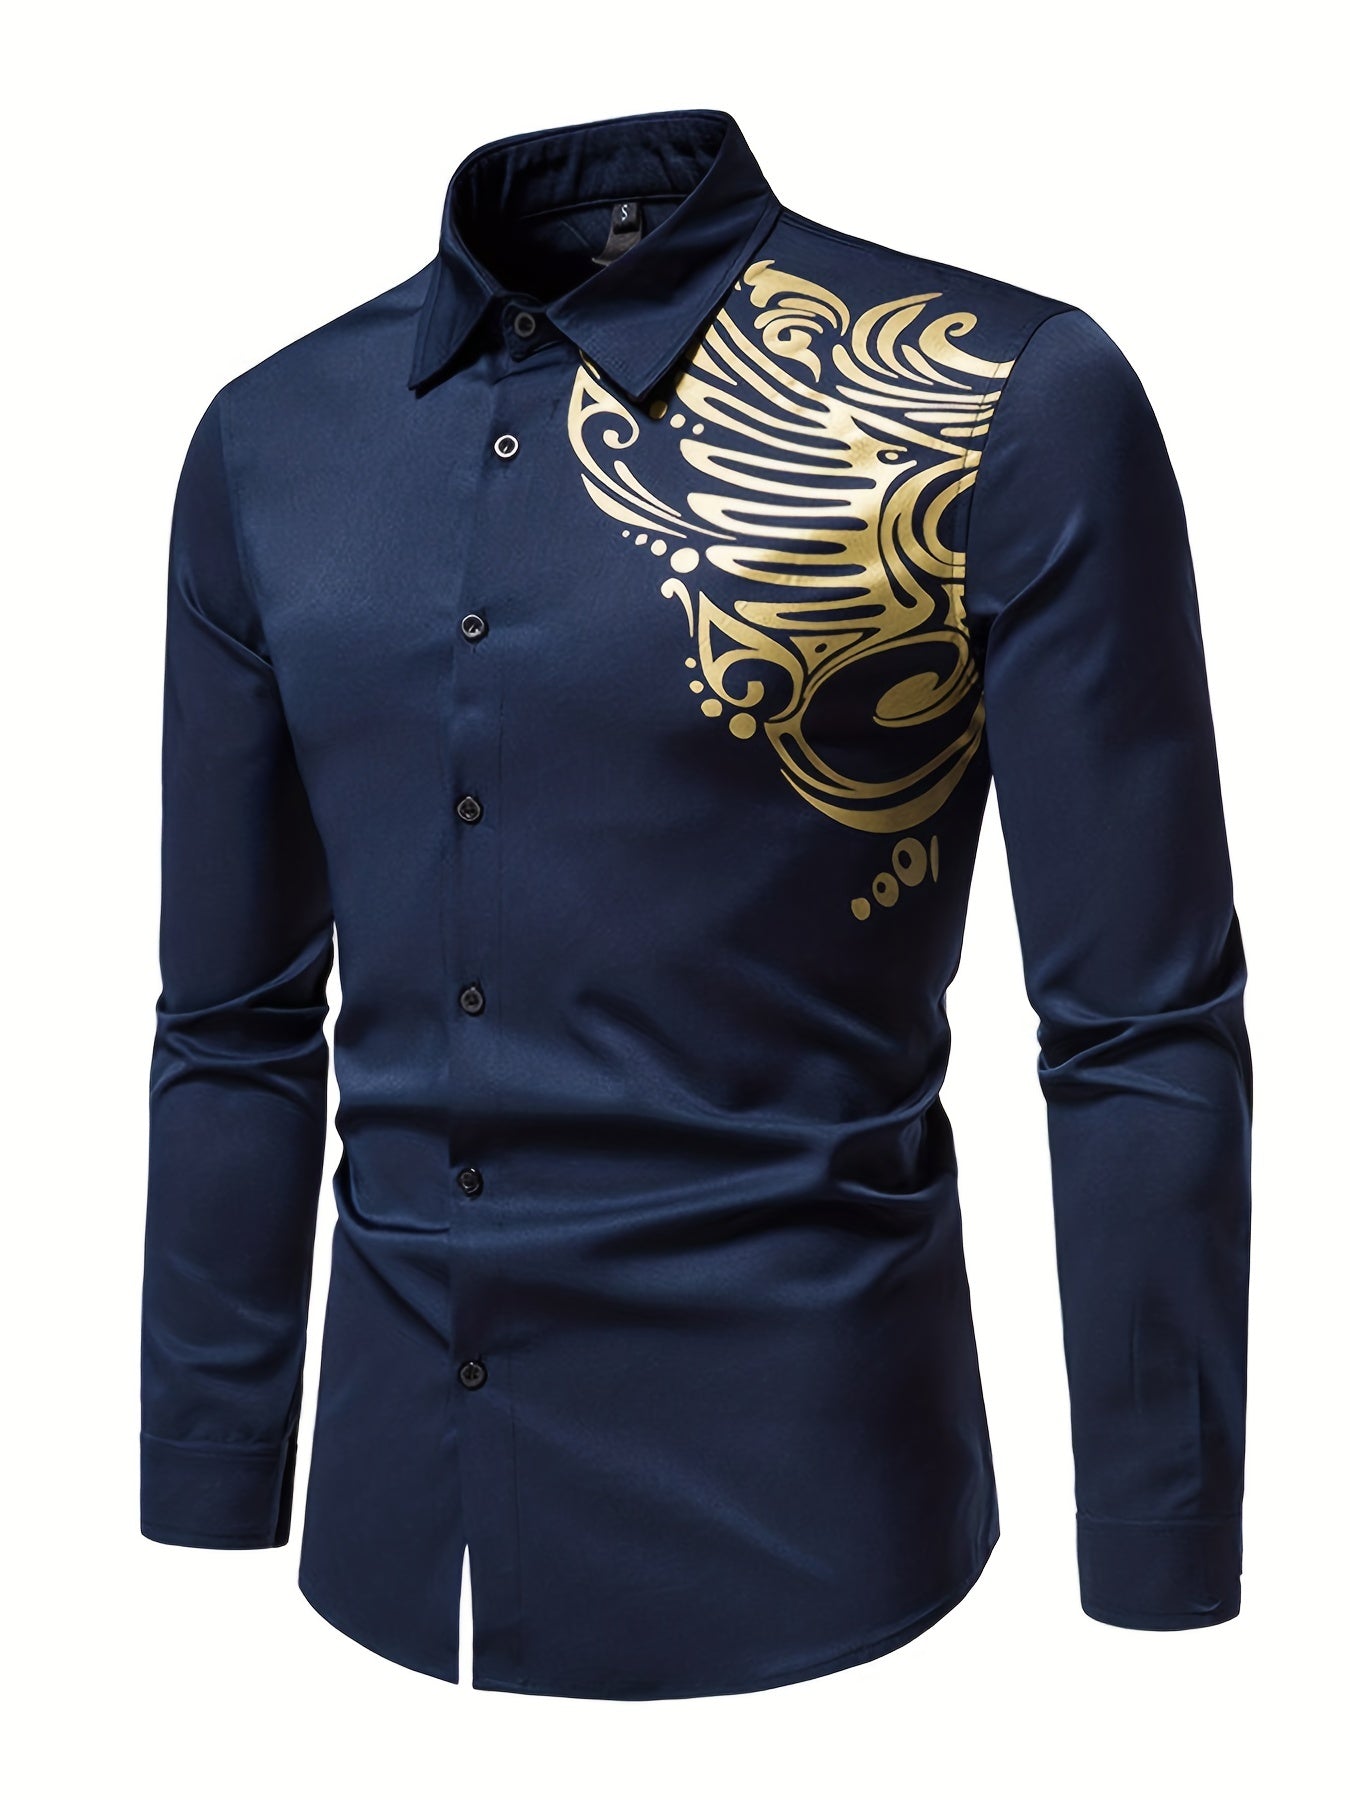 Make a Statement in This Stylish Men's Gold-Printed Long-Sleeved Shirt